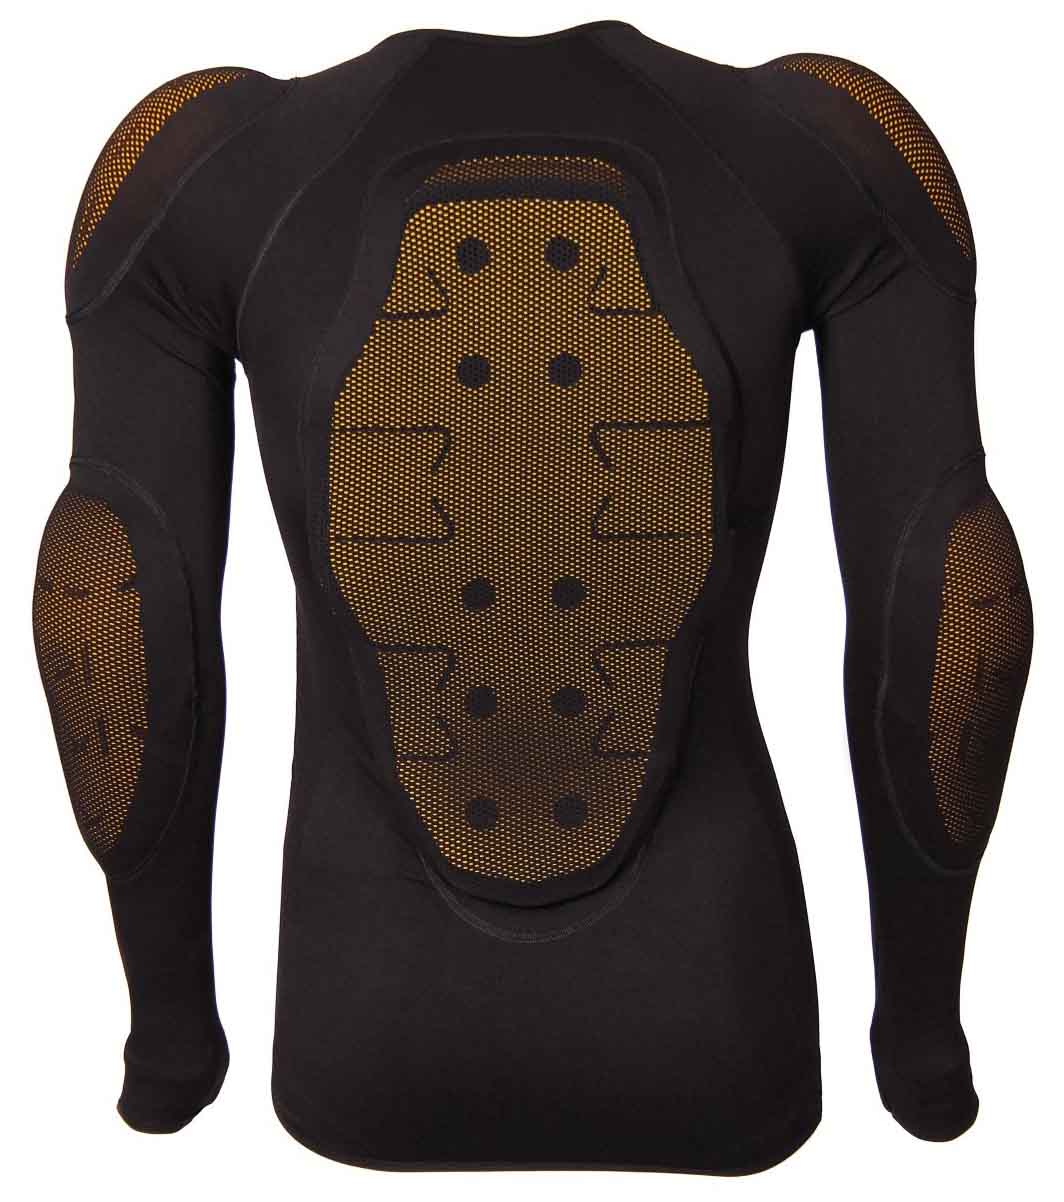 Forcefield Pro Shirt X-V 2 Body Armour With Back Protector